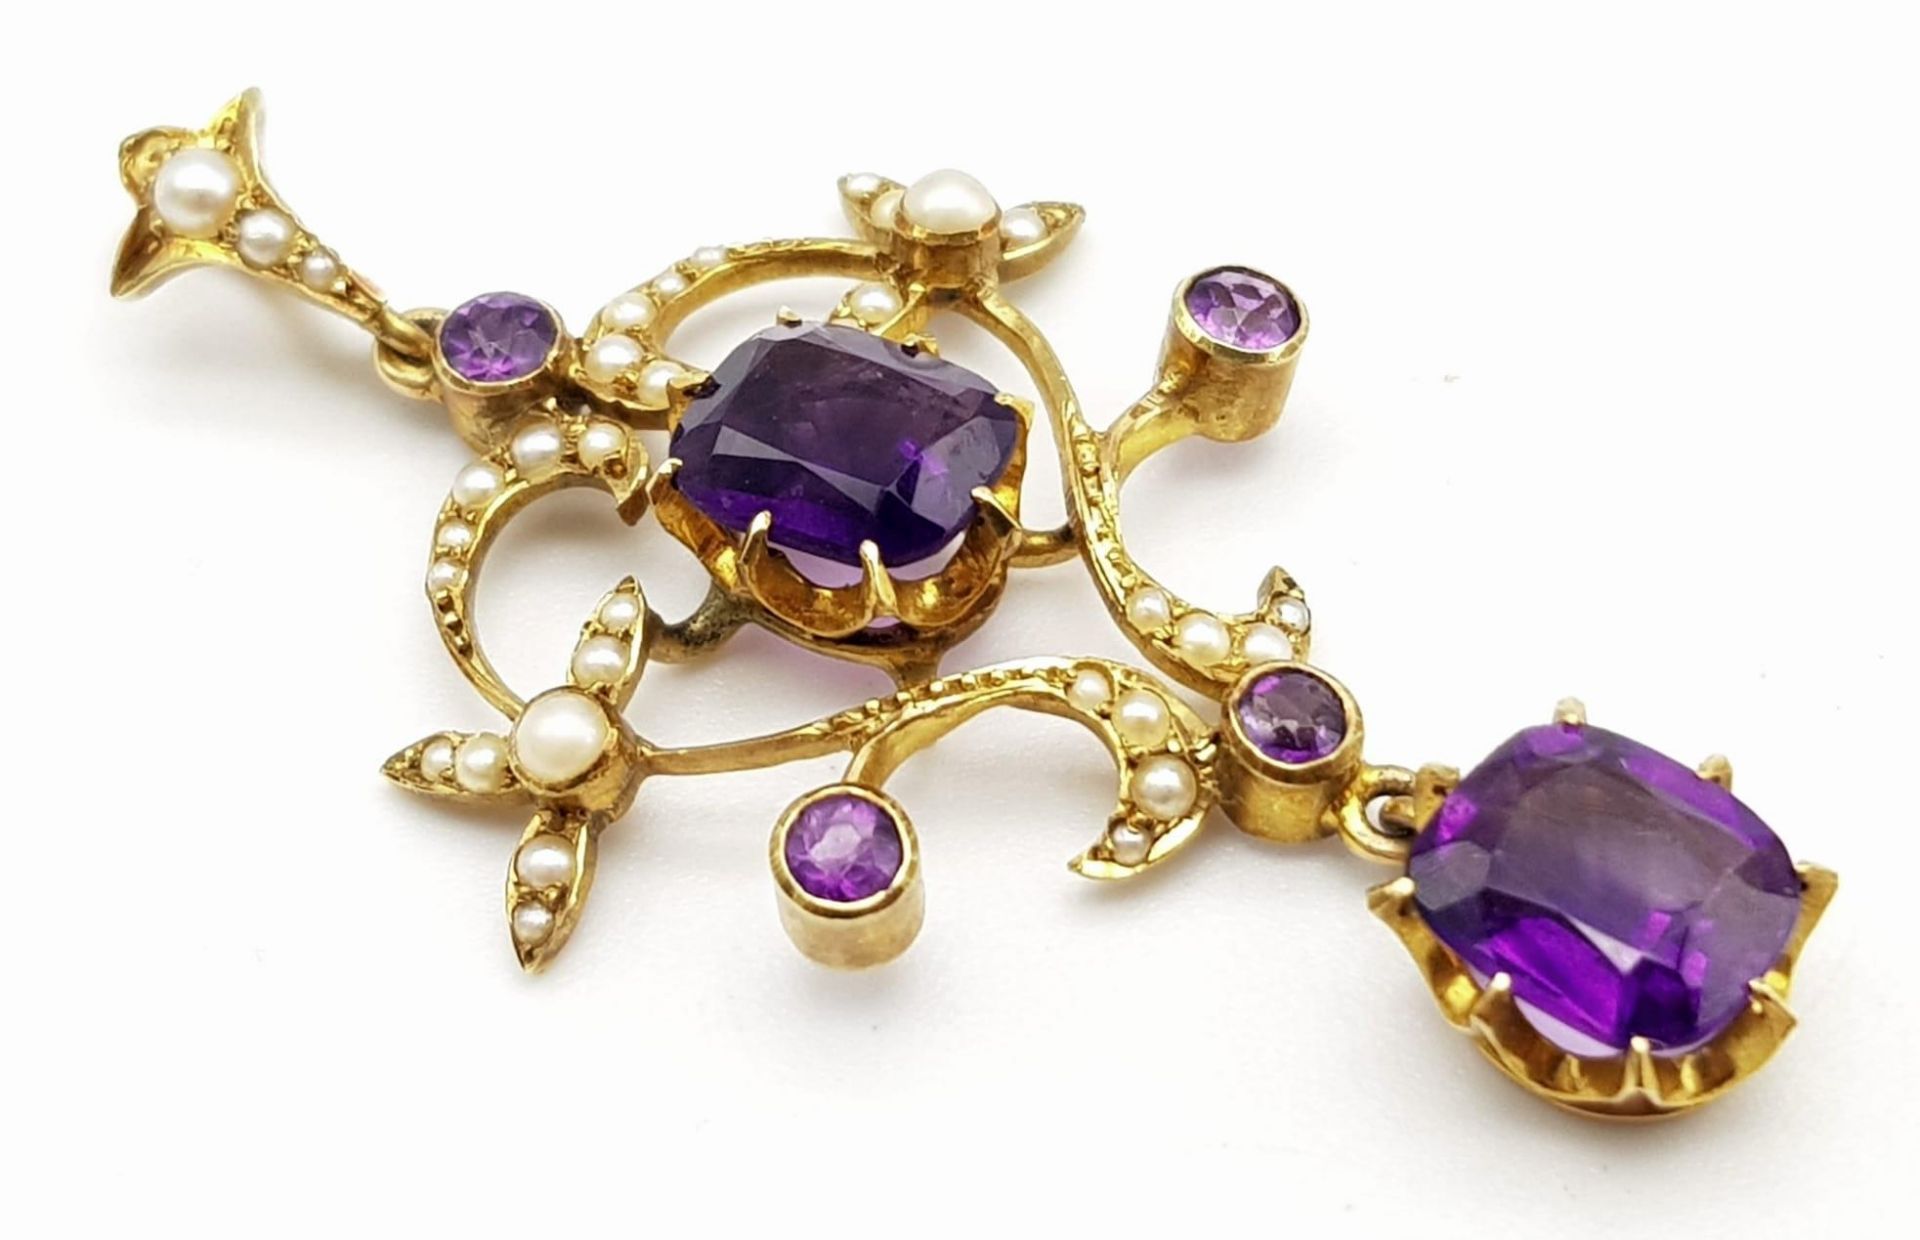 An ART NOUVEAU 9 K yellow gold pendant with vivid coloured amethysts and natural seed pearls, - Image 2 of 7